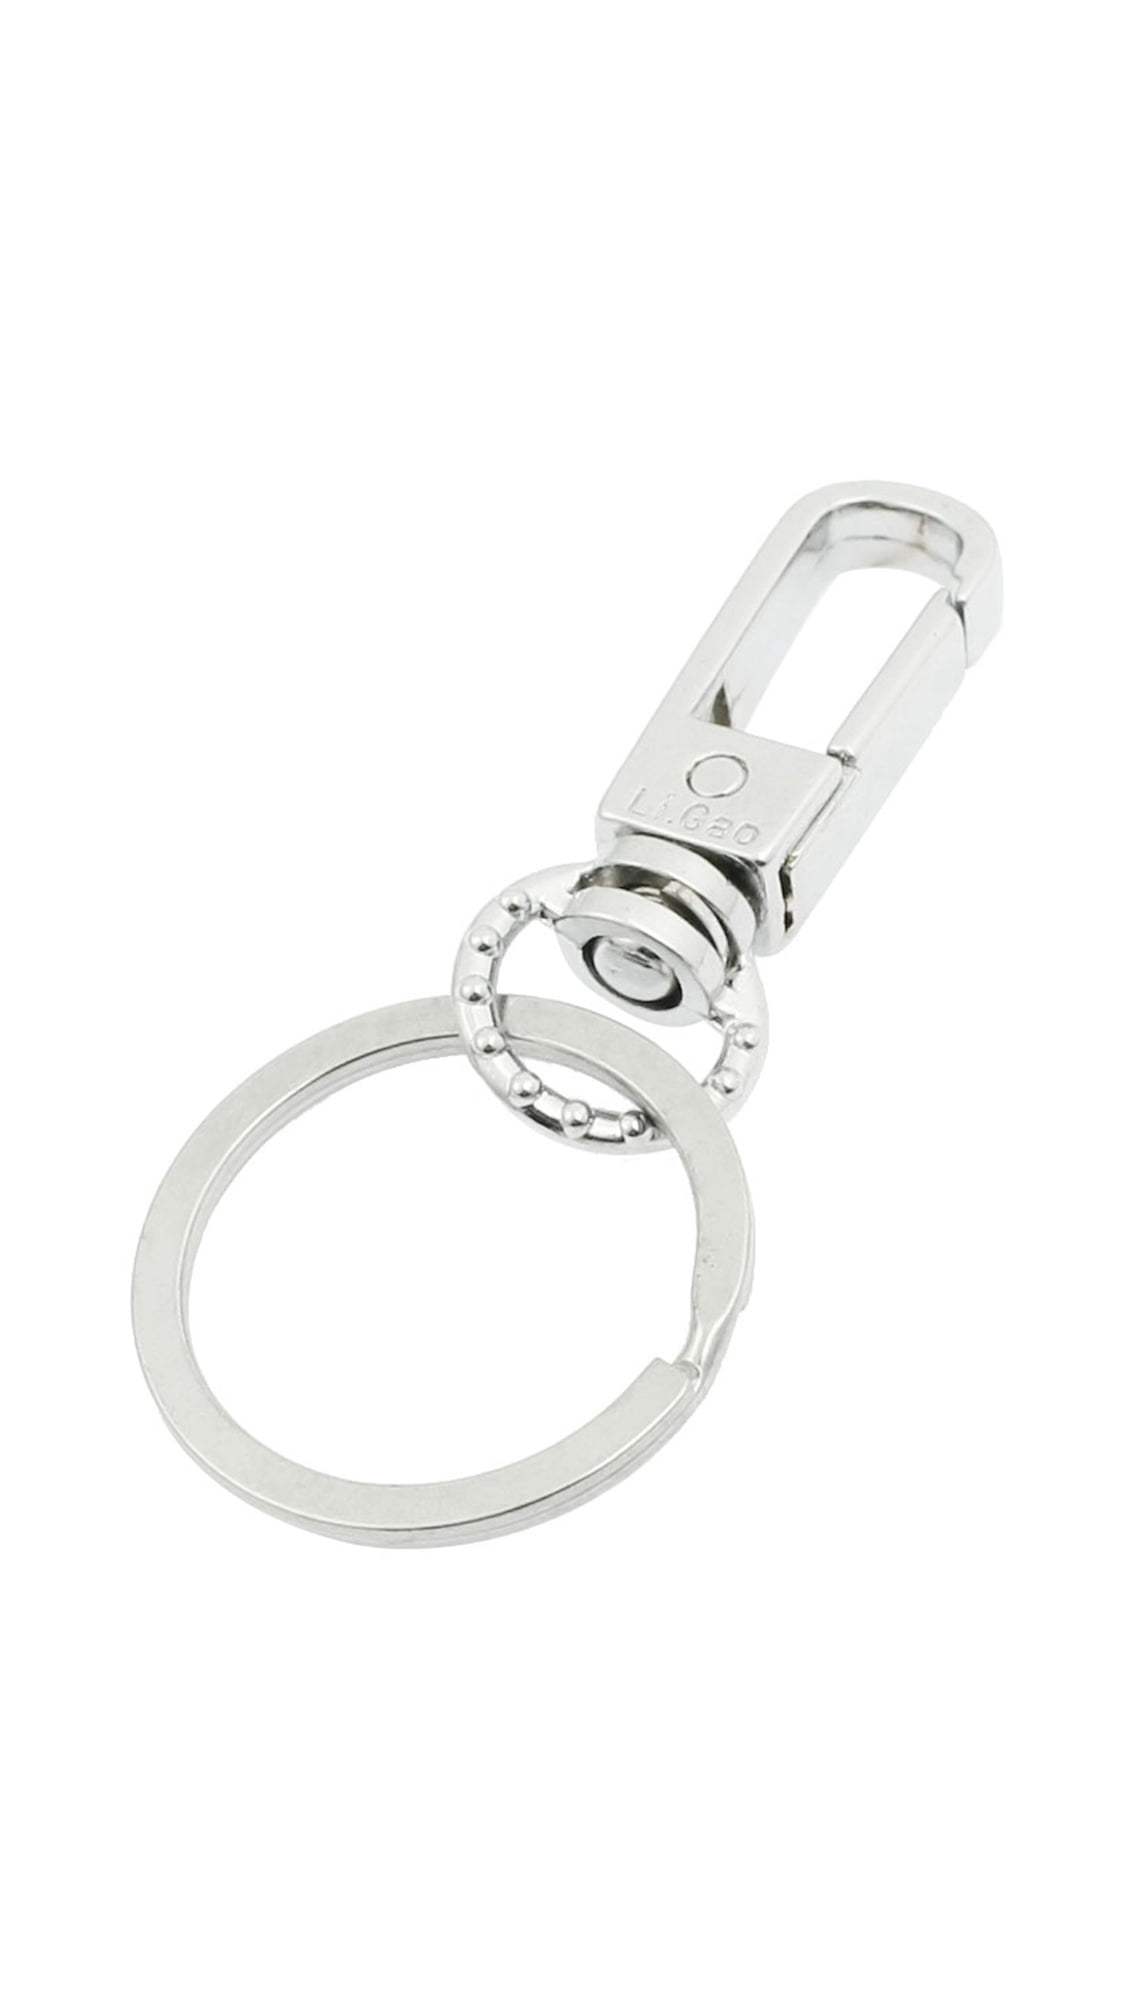 Keychain With Clasp Double Loop Football Keyrings